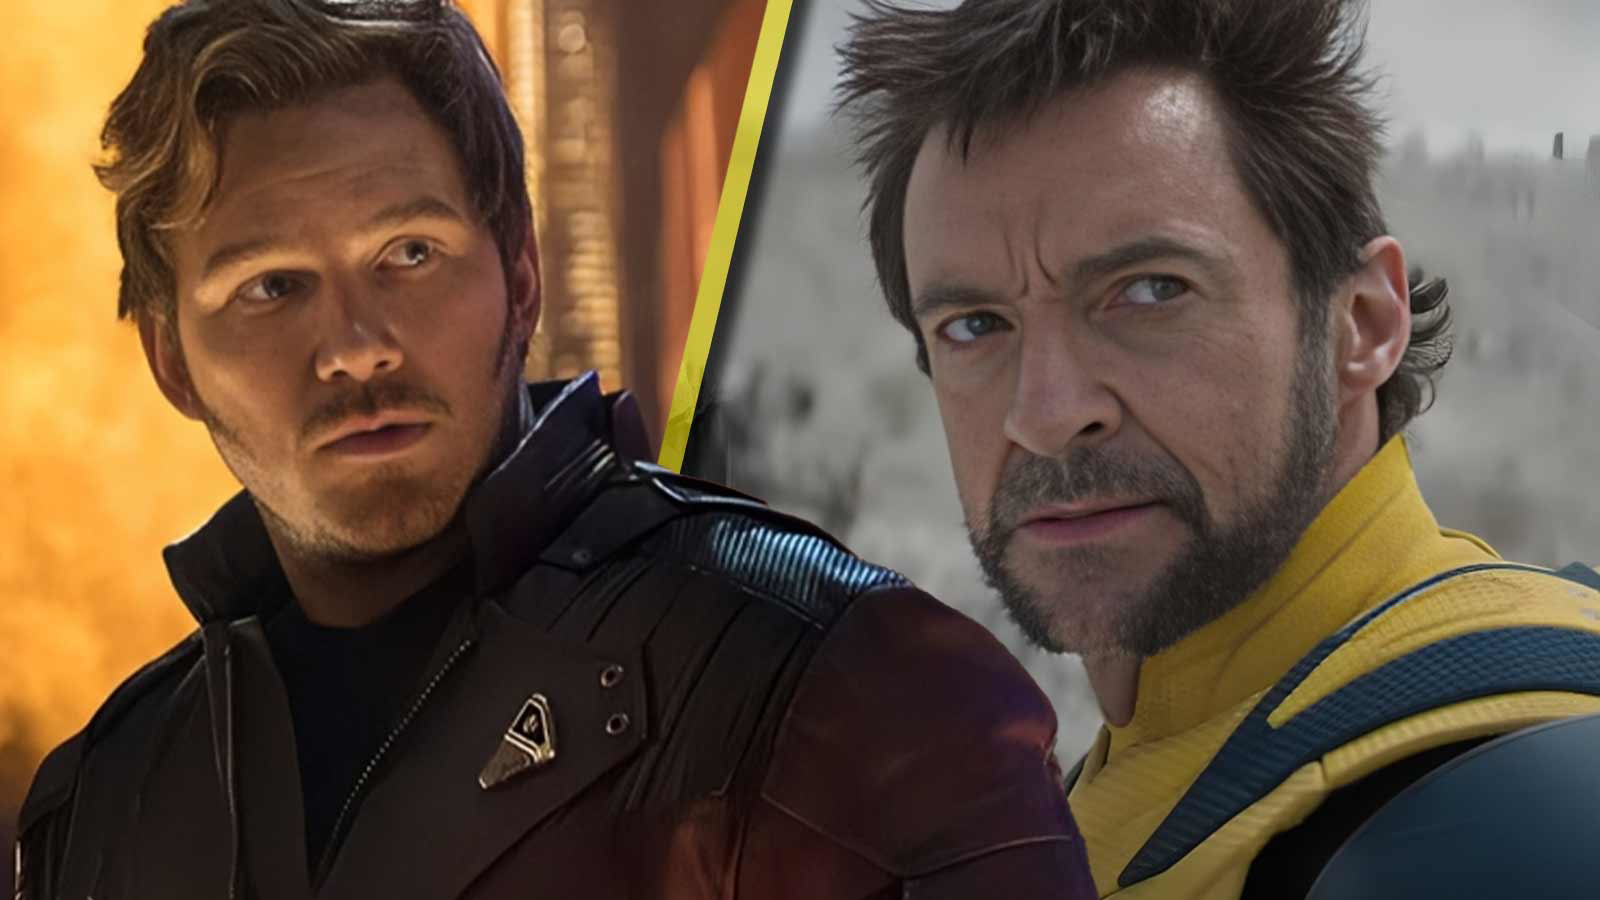 “I thought he’d be taller”: Marvel Veteran Chris Pratt Takes a Swing at Hugh Jackman By Trolling 1 Aspect of Wolverine That Even Deadpool 3 Couldn’t Ignore